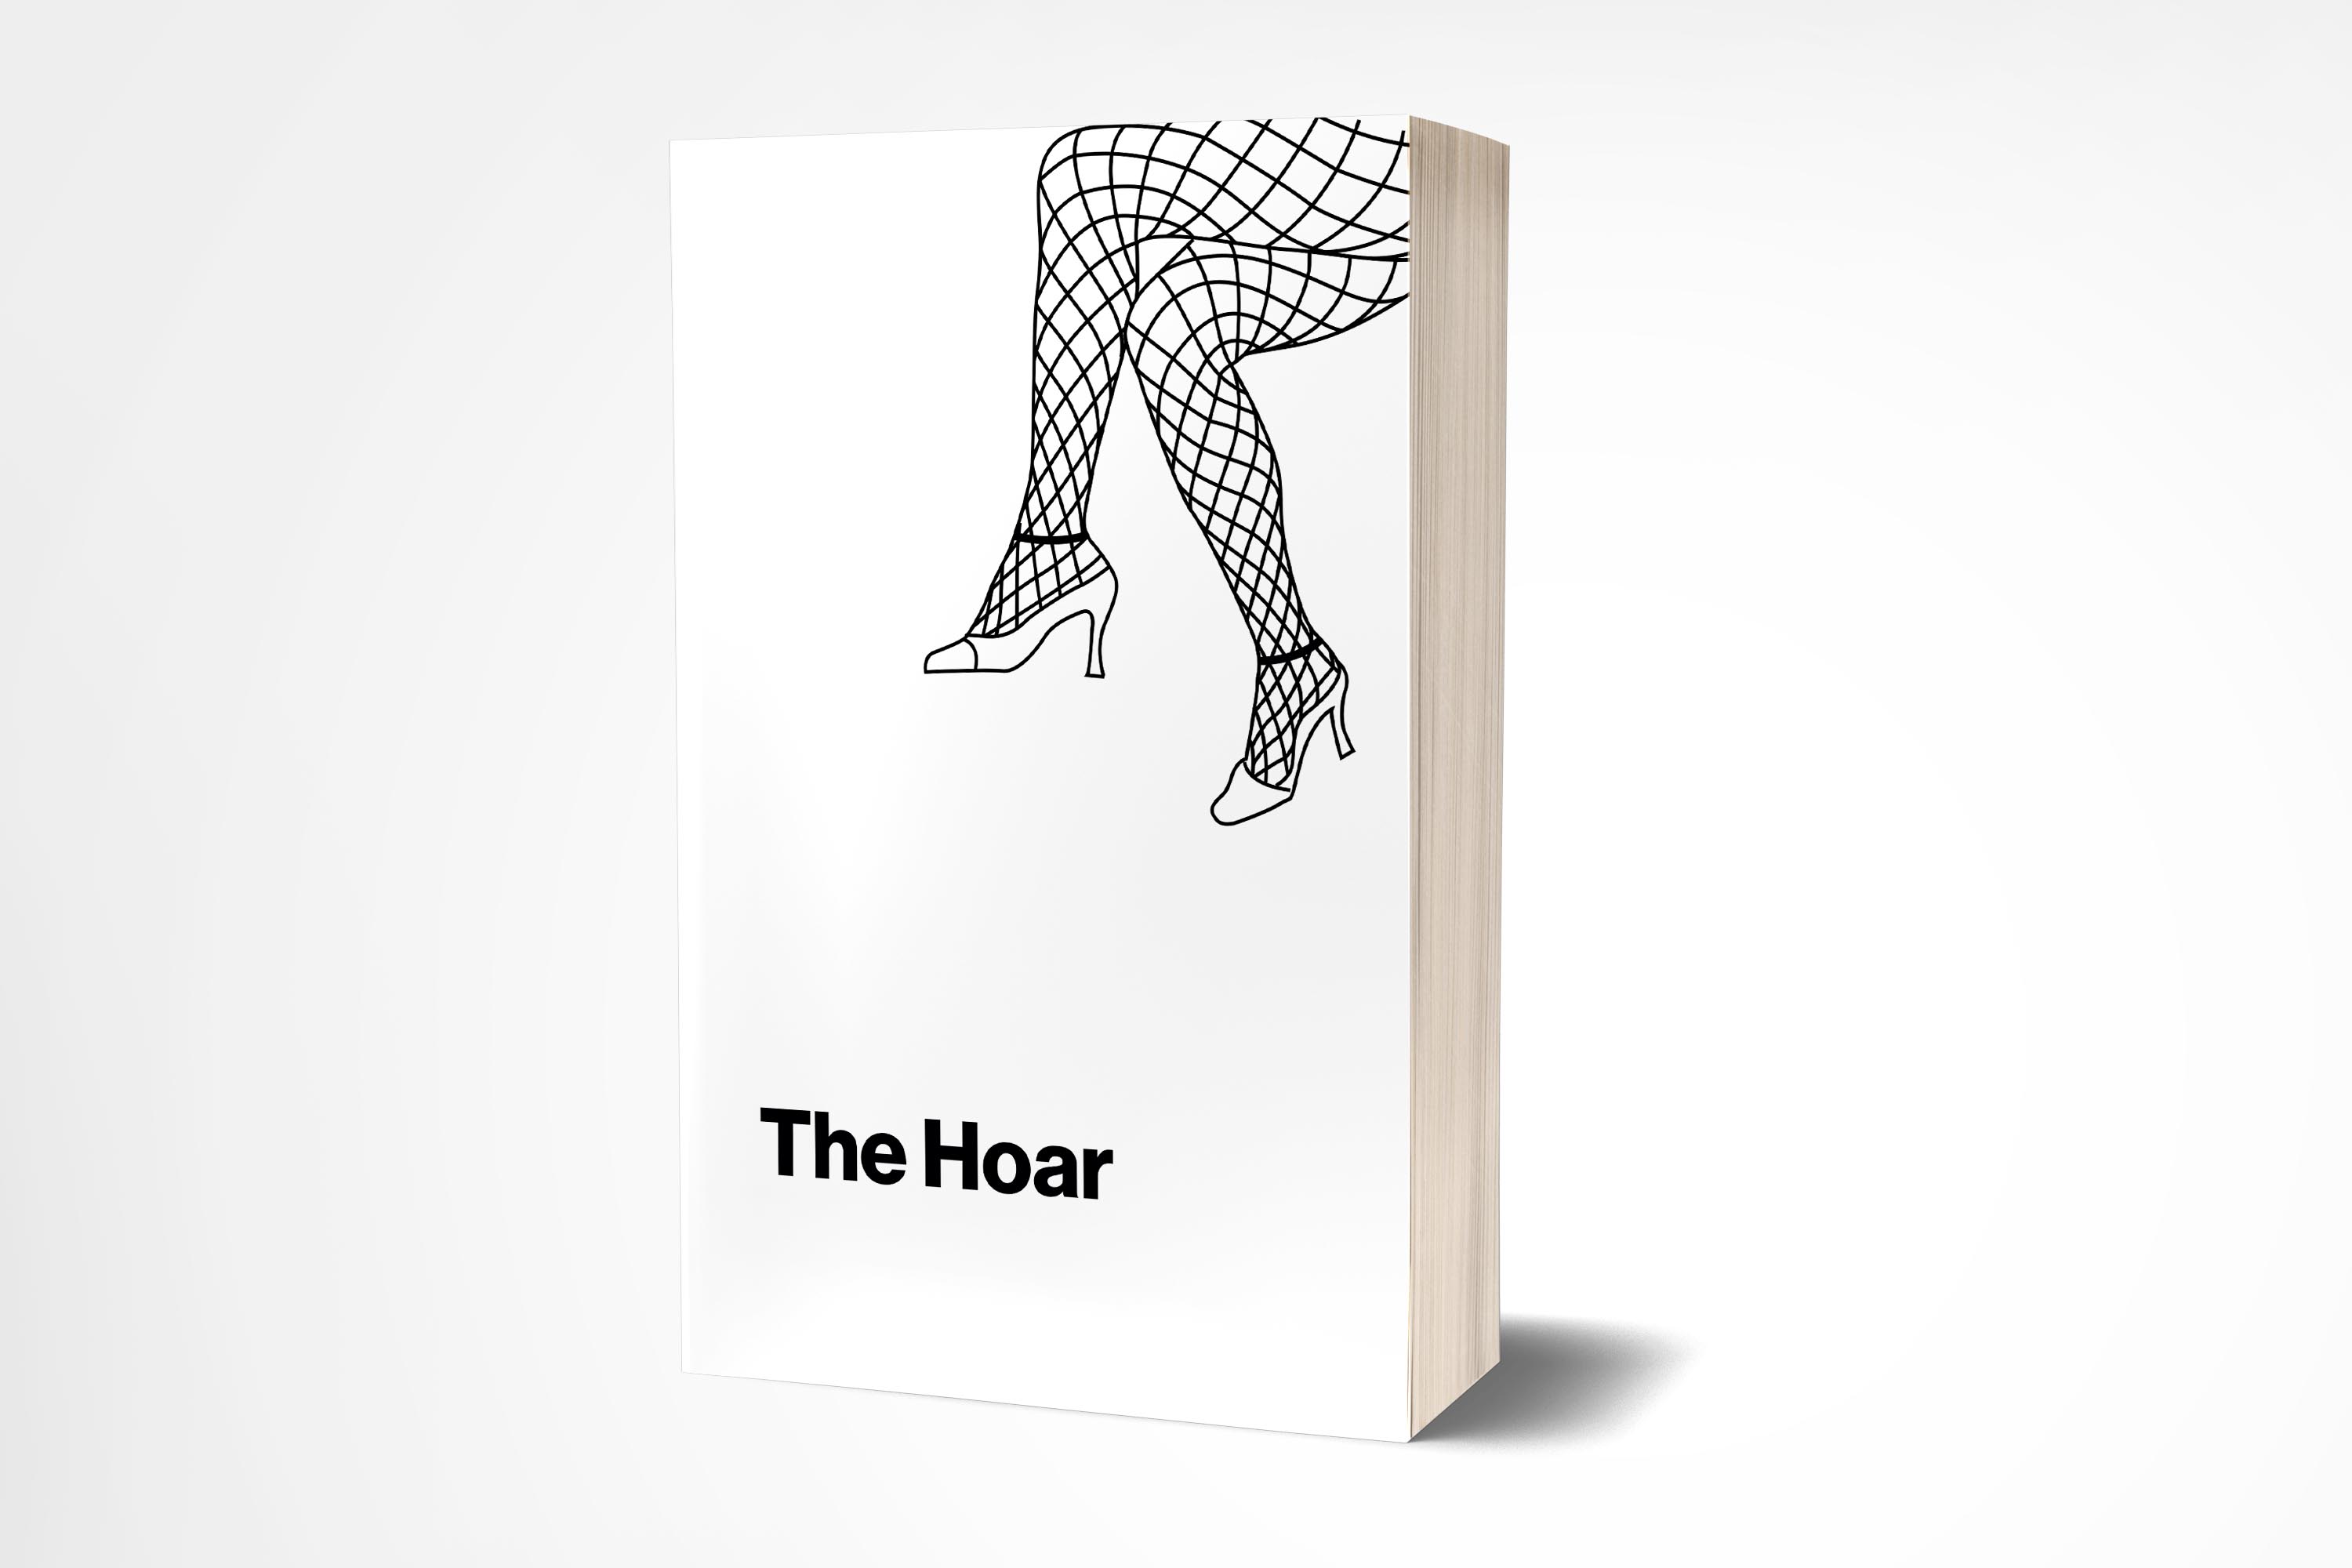 The Hoar's book